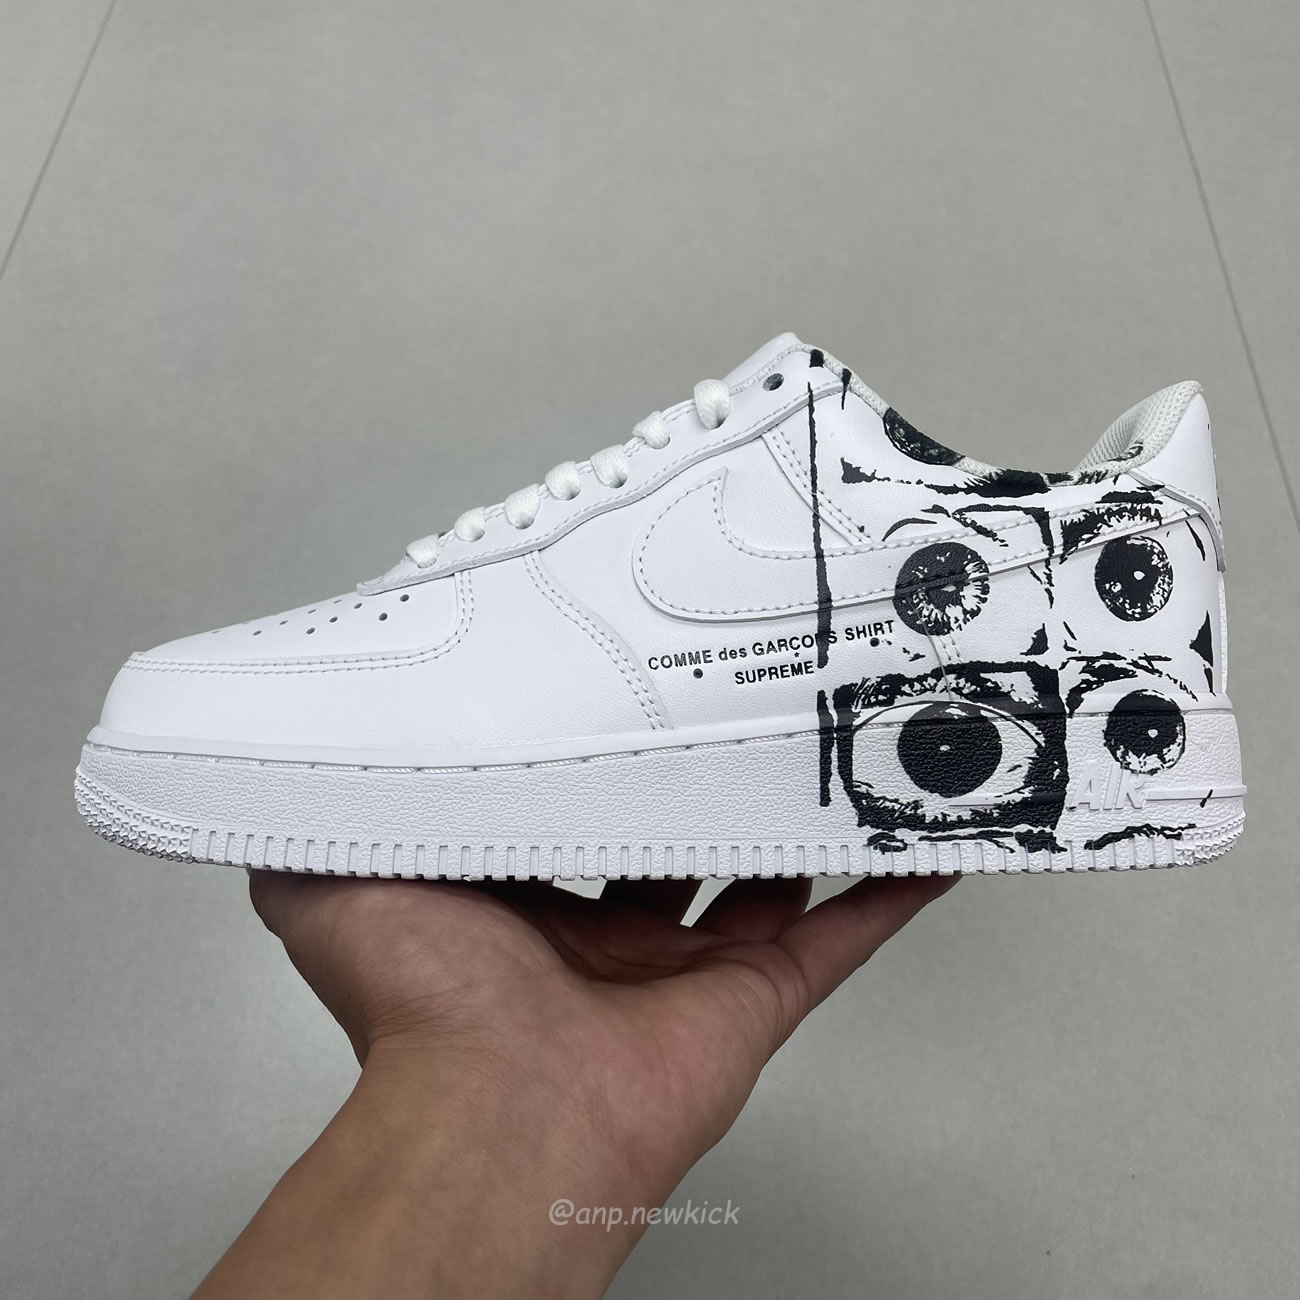 Nike Air Force 1 Low Supreme Comme Des Garcons 923044 100 (8) - newkick.org